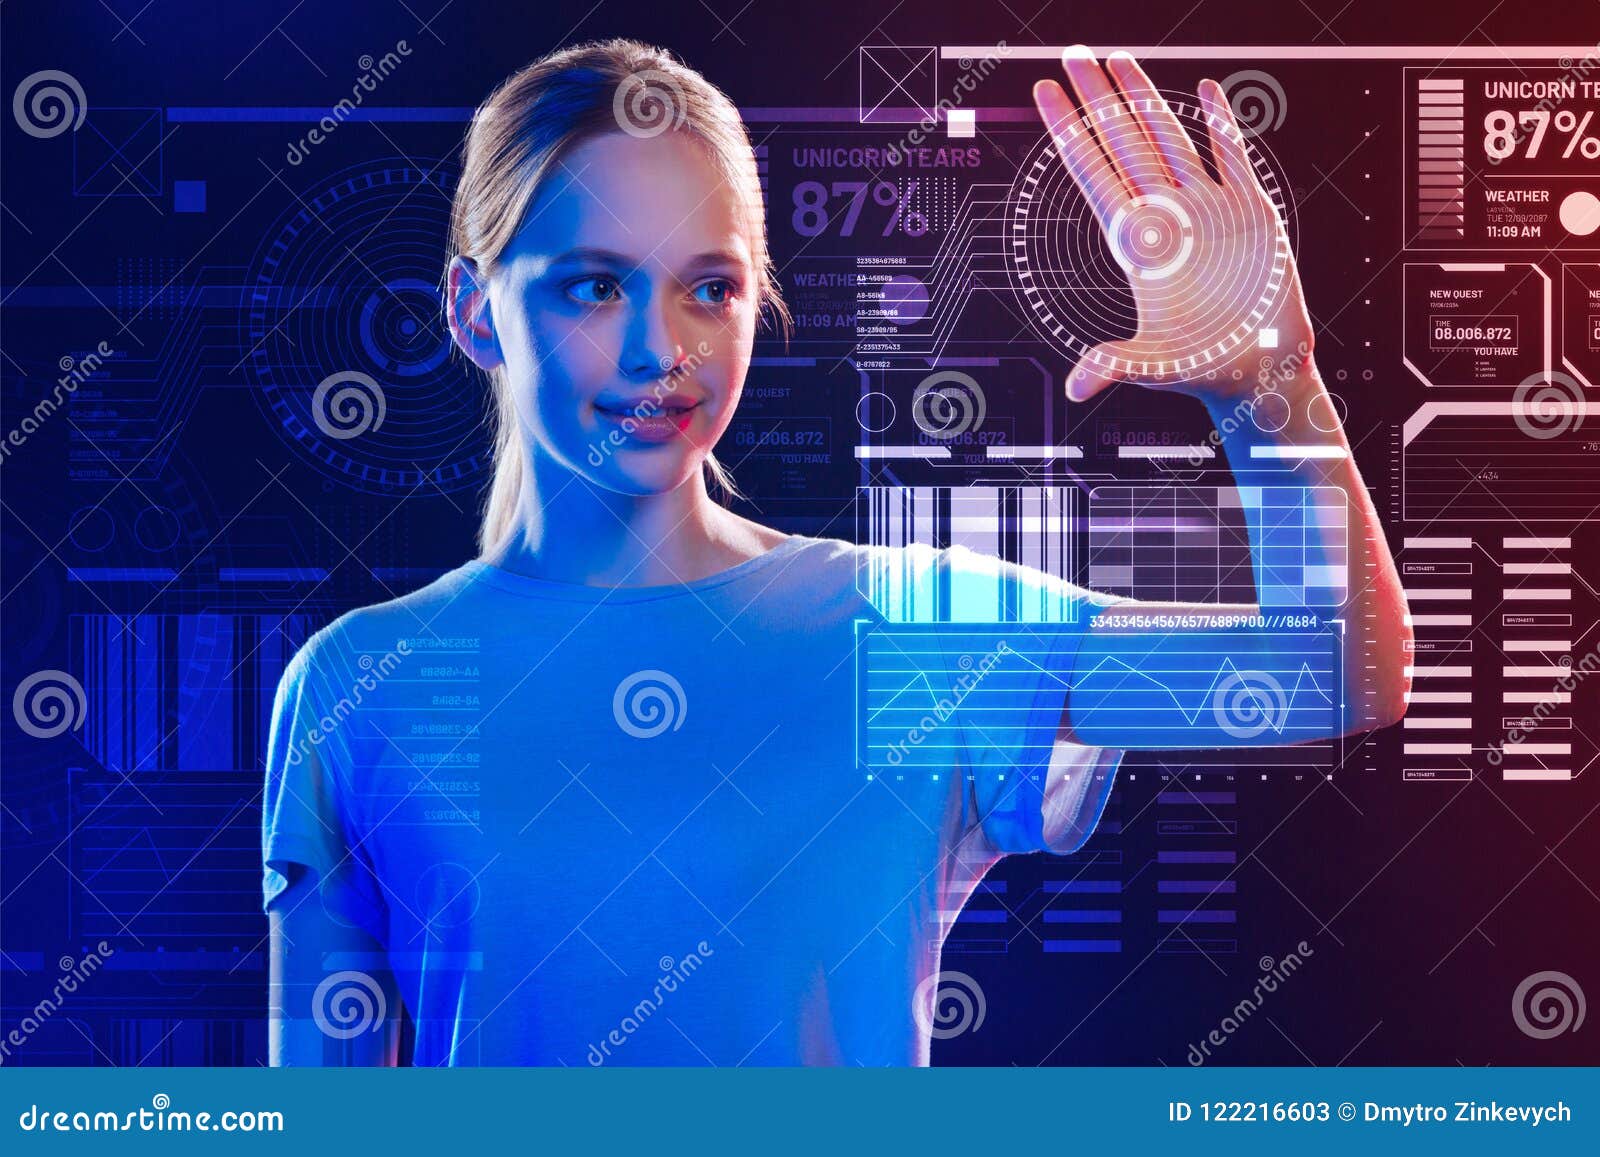 Smiling girl touching the screen while using a new security system. Convenient system. Cheerful calm teenage girl carefully touching a transparent screen and scanning her hand while using a futuristic security system